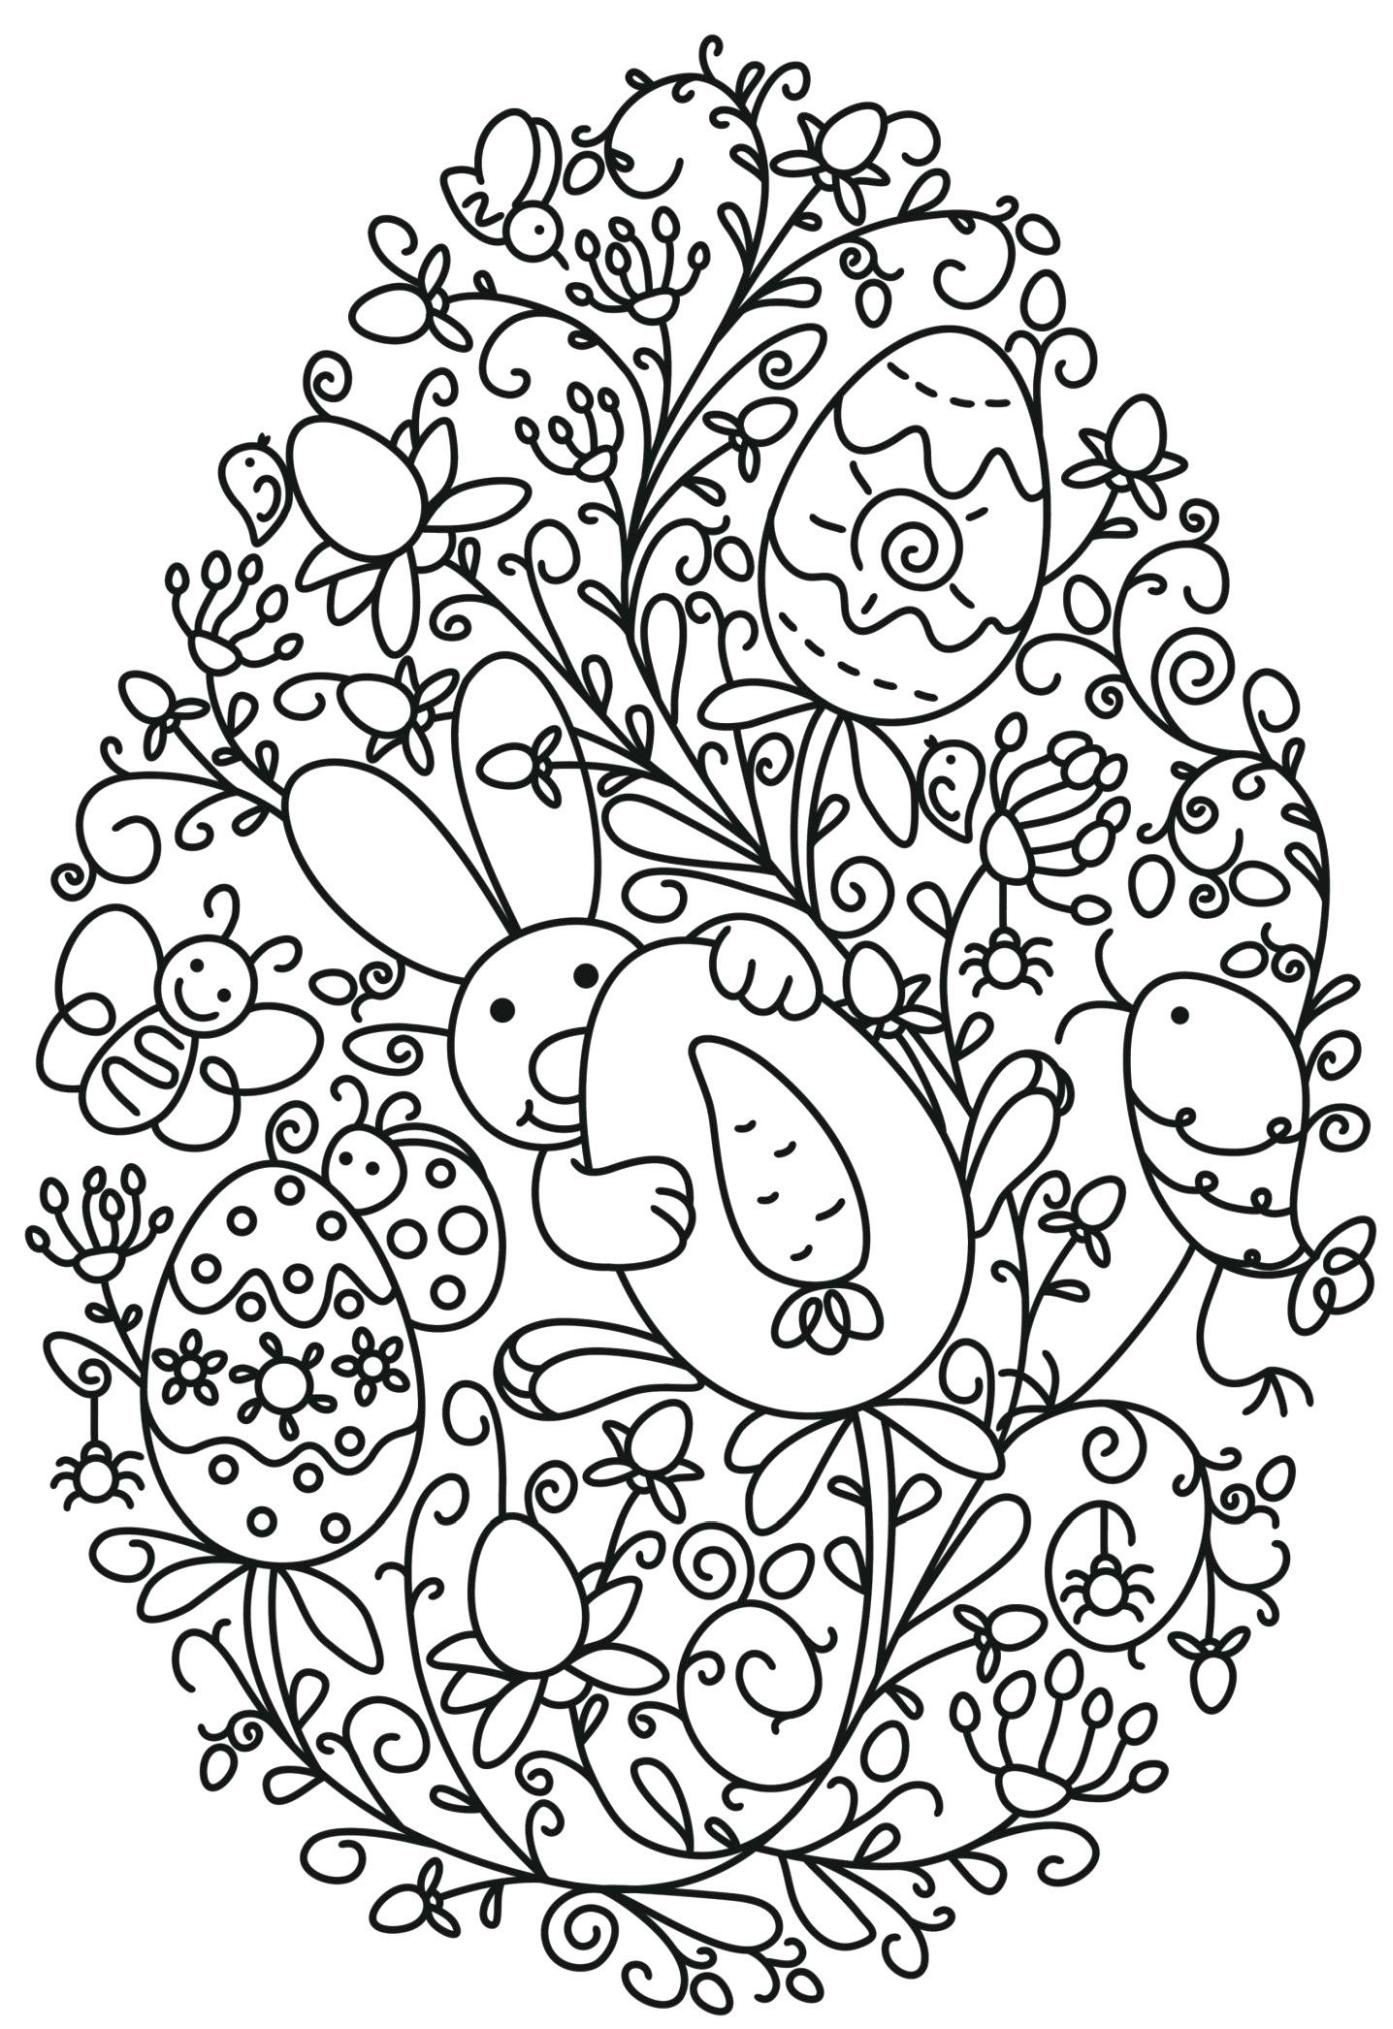 Get This Adult Easter Coloring Pages Funny Easter Bunny Holding an Egg